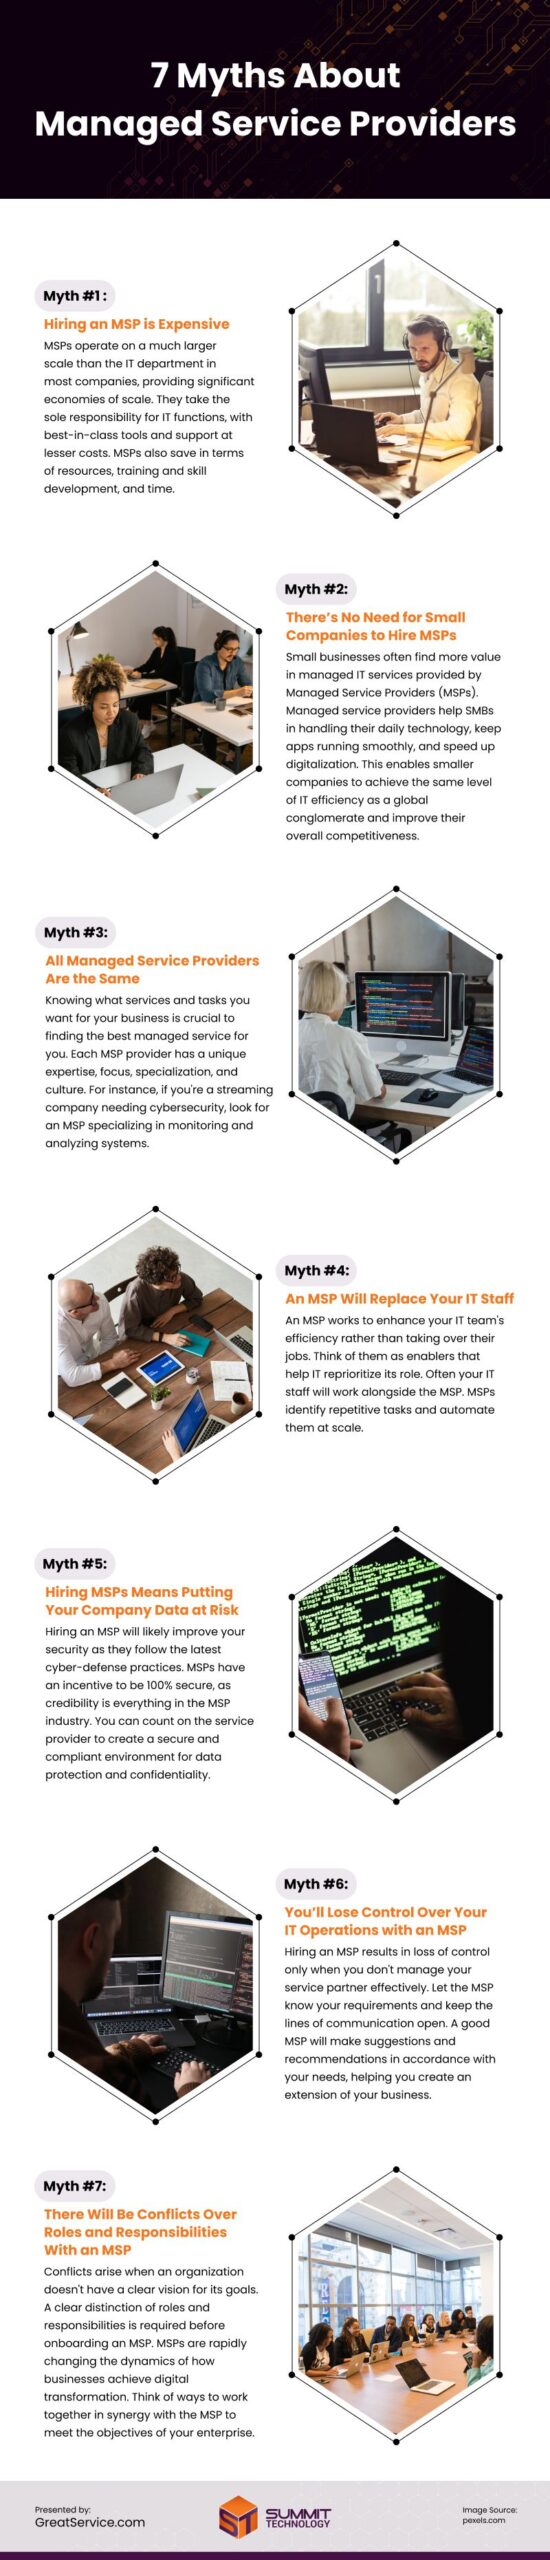 7 Myths About Managed Service Providers Infographic